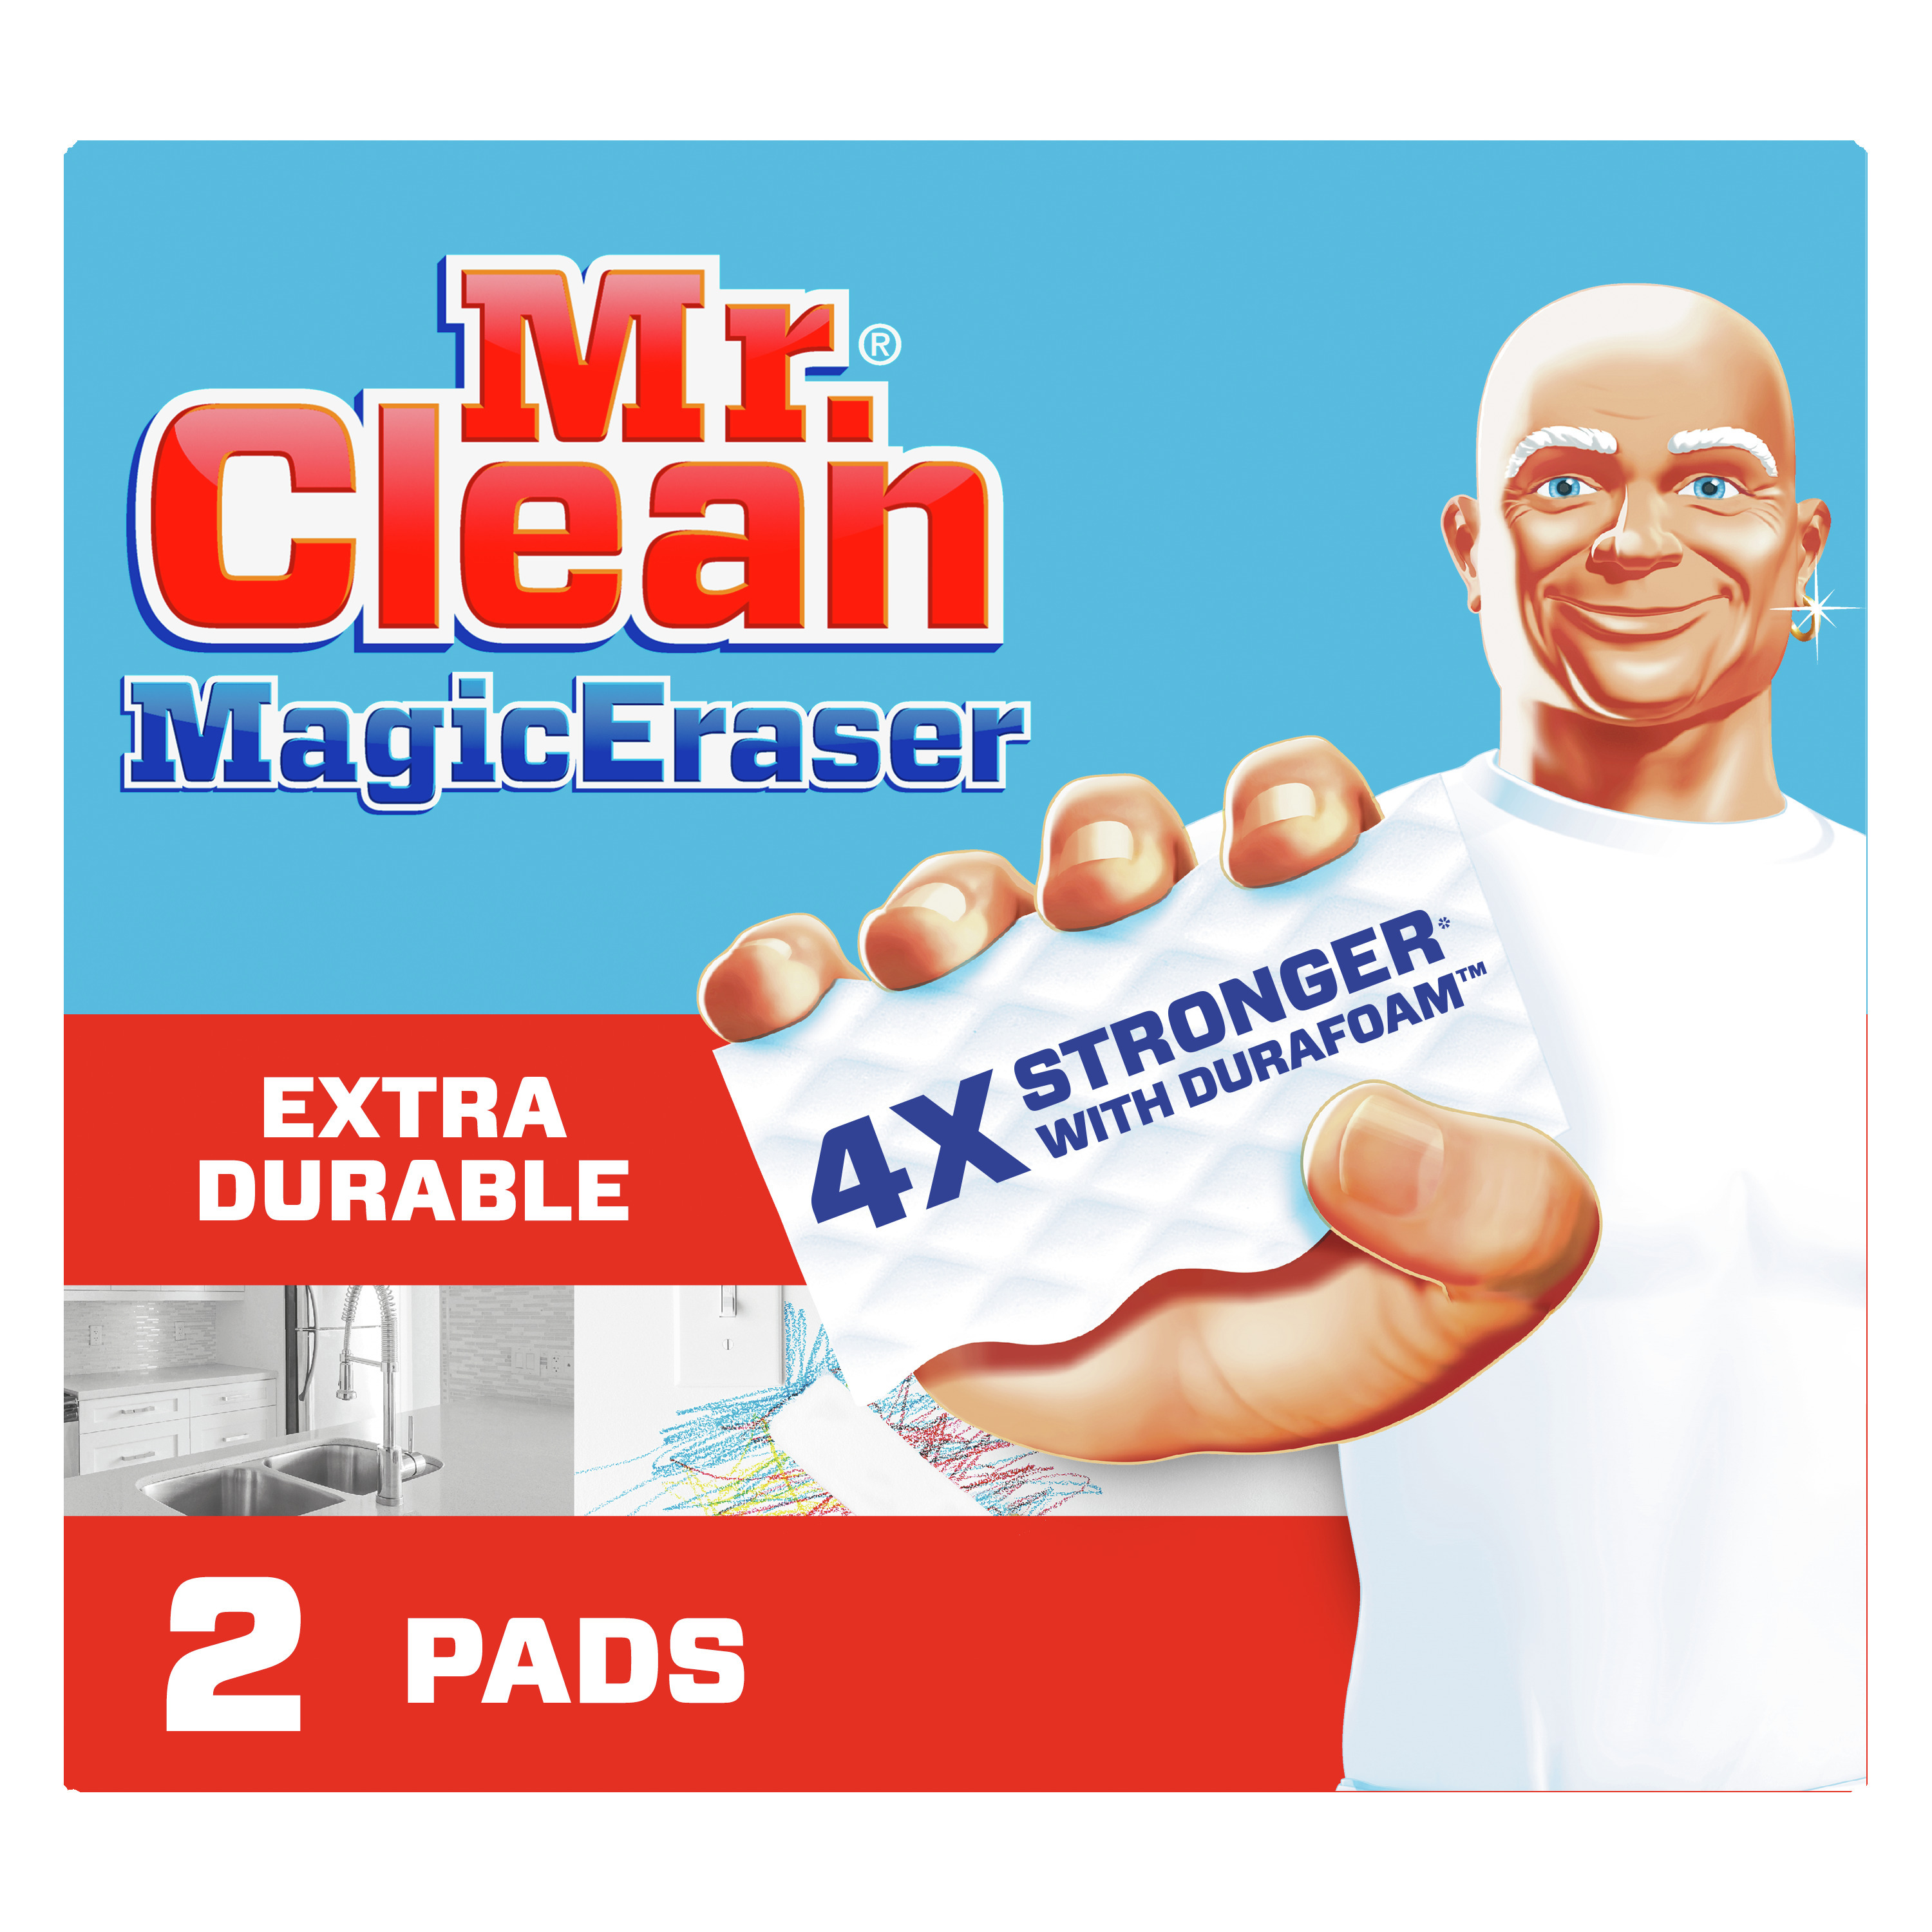 Mr. Clean Magic Eraser Extra Durable, Cleaning Pads with Durafoam, 2 Ct - image 1 of 11